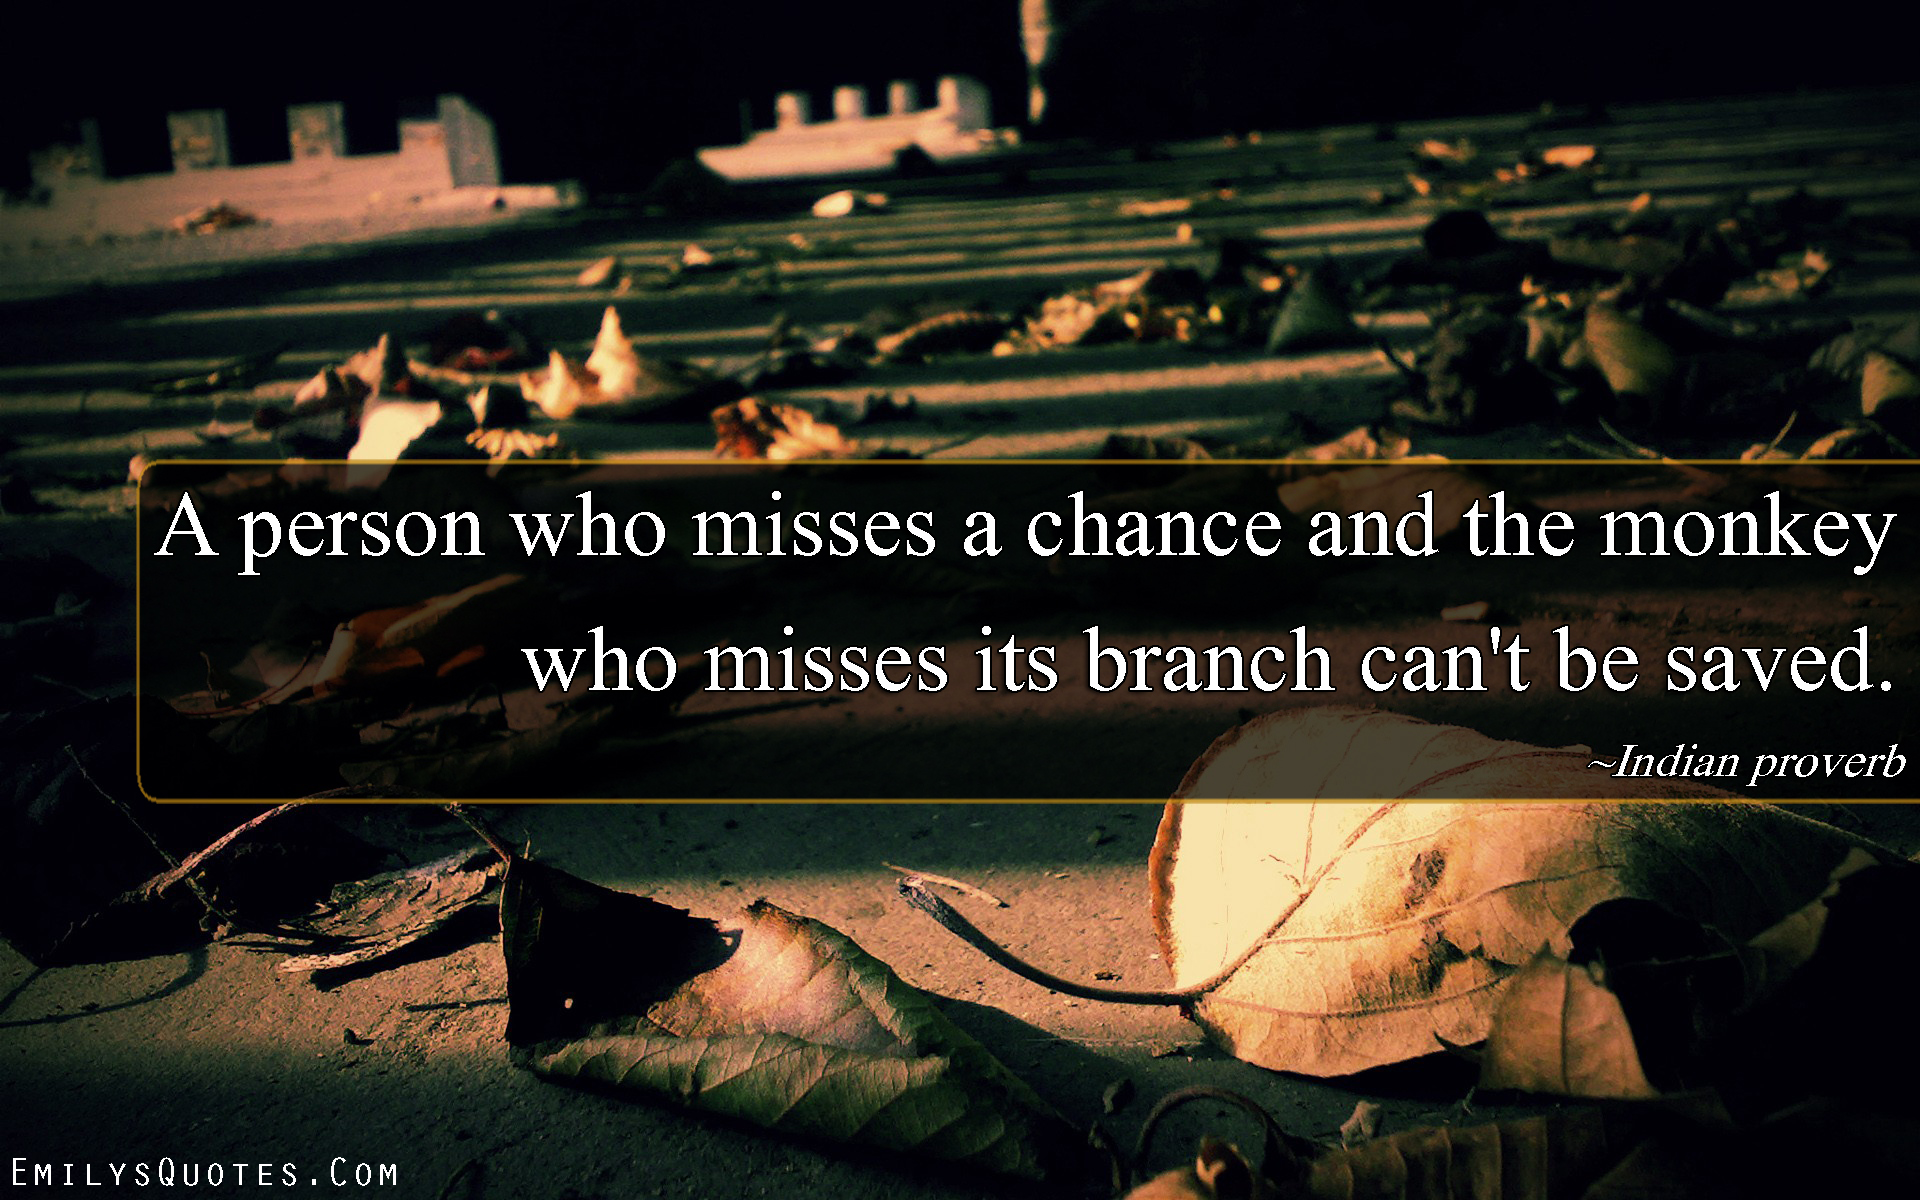 A person who misses a chance and the monkey who misses its branch can’t be saved